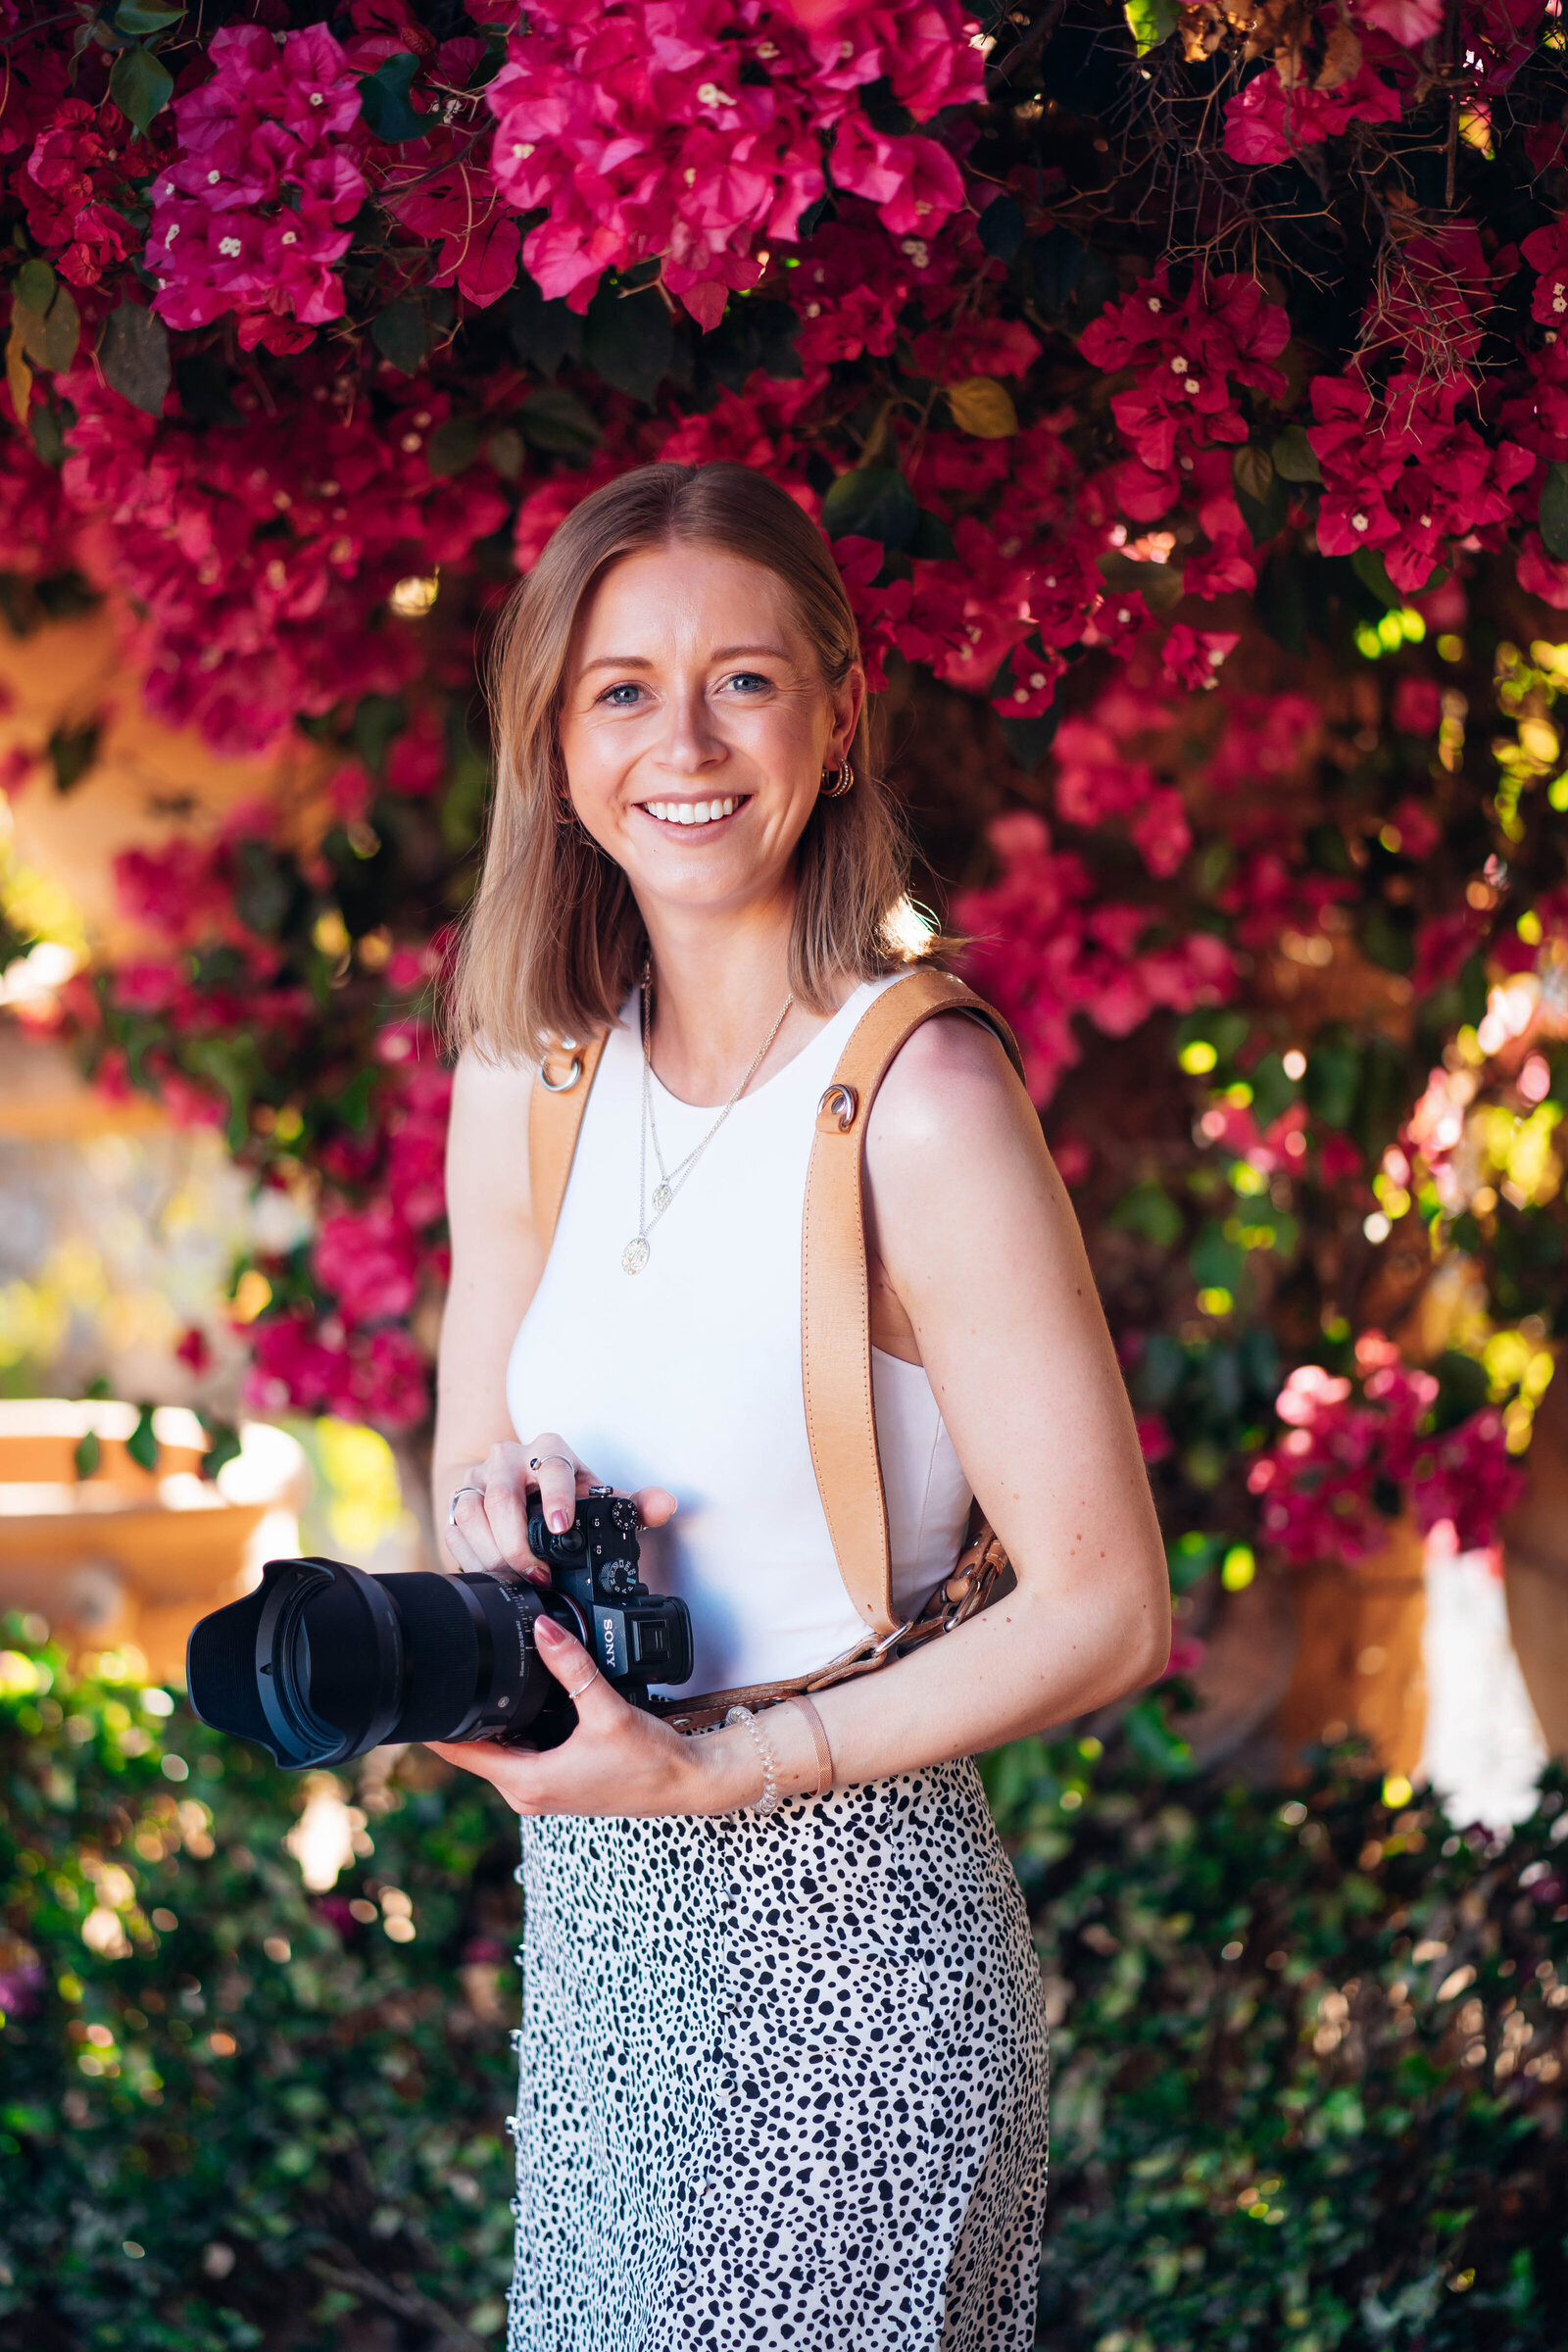 Emily Collett, UK, Destination & Cotswold Wedding Photographer, photographing at Beldi Country Club